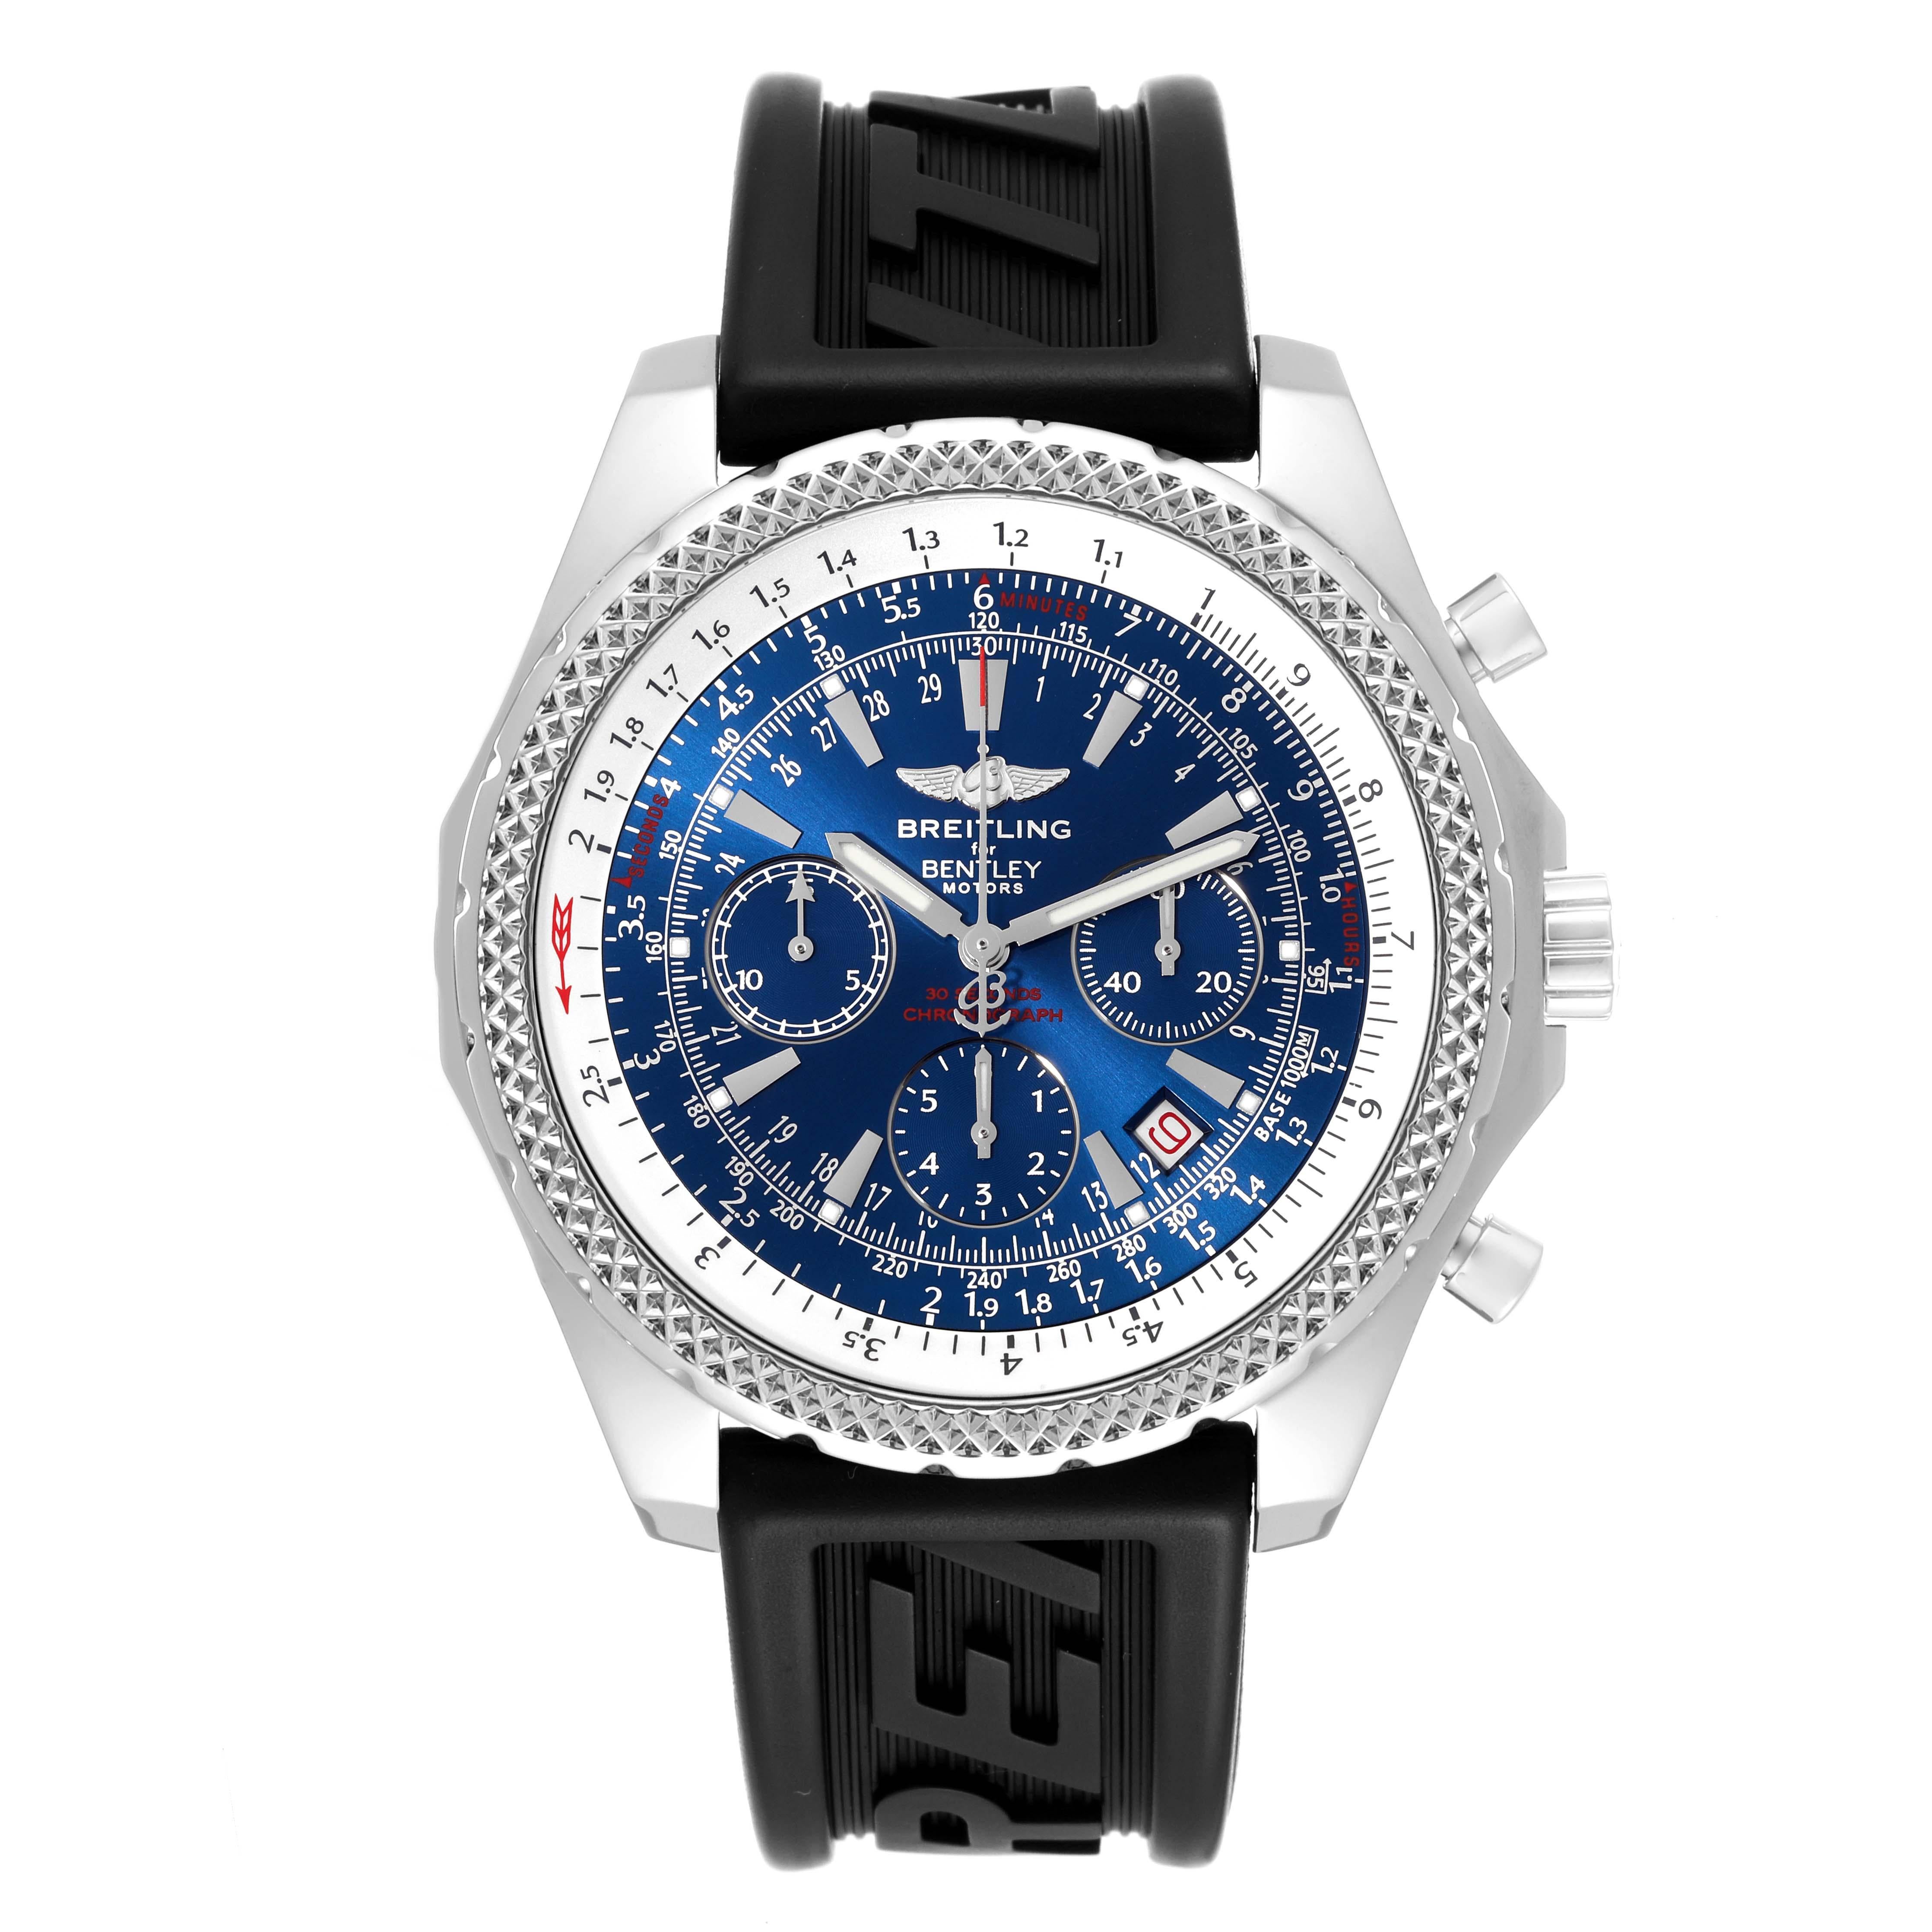 Breitling Bentley Motors Blue Dial Chronograph Steel Mens Watch A25362 Box Papers. Automatic self-winding officially certified chronometer movement. Chronograph function. Stainless steel case 49 mm in diameter. Stainless steel screwed-down crown and